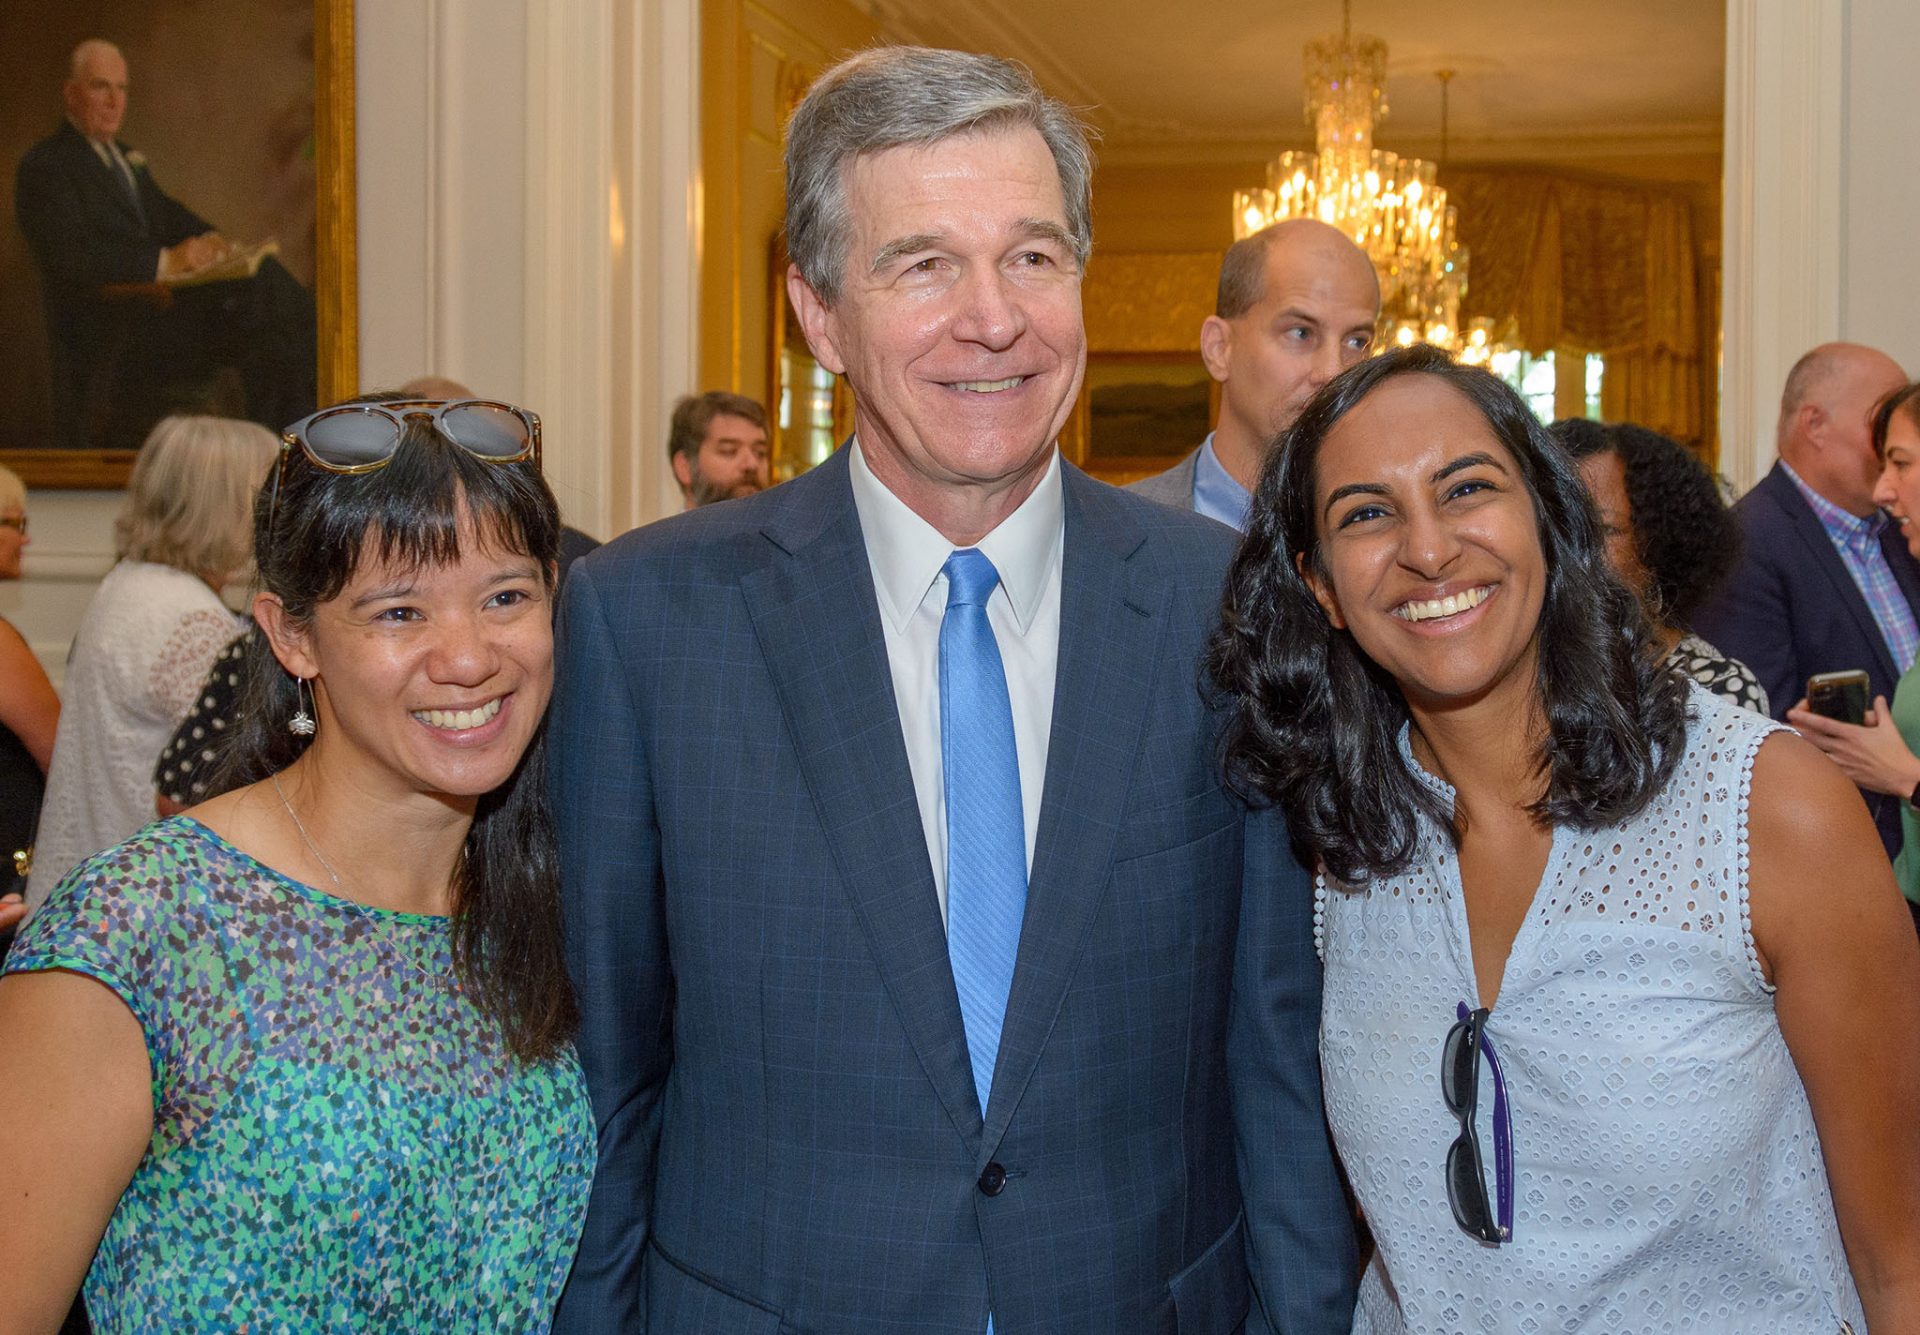 From left to right: Charlene Wong ’04, North Carolina Governor Roy Cooper ’79, and Madhu Vulimiri ’14.